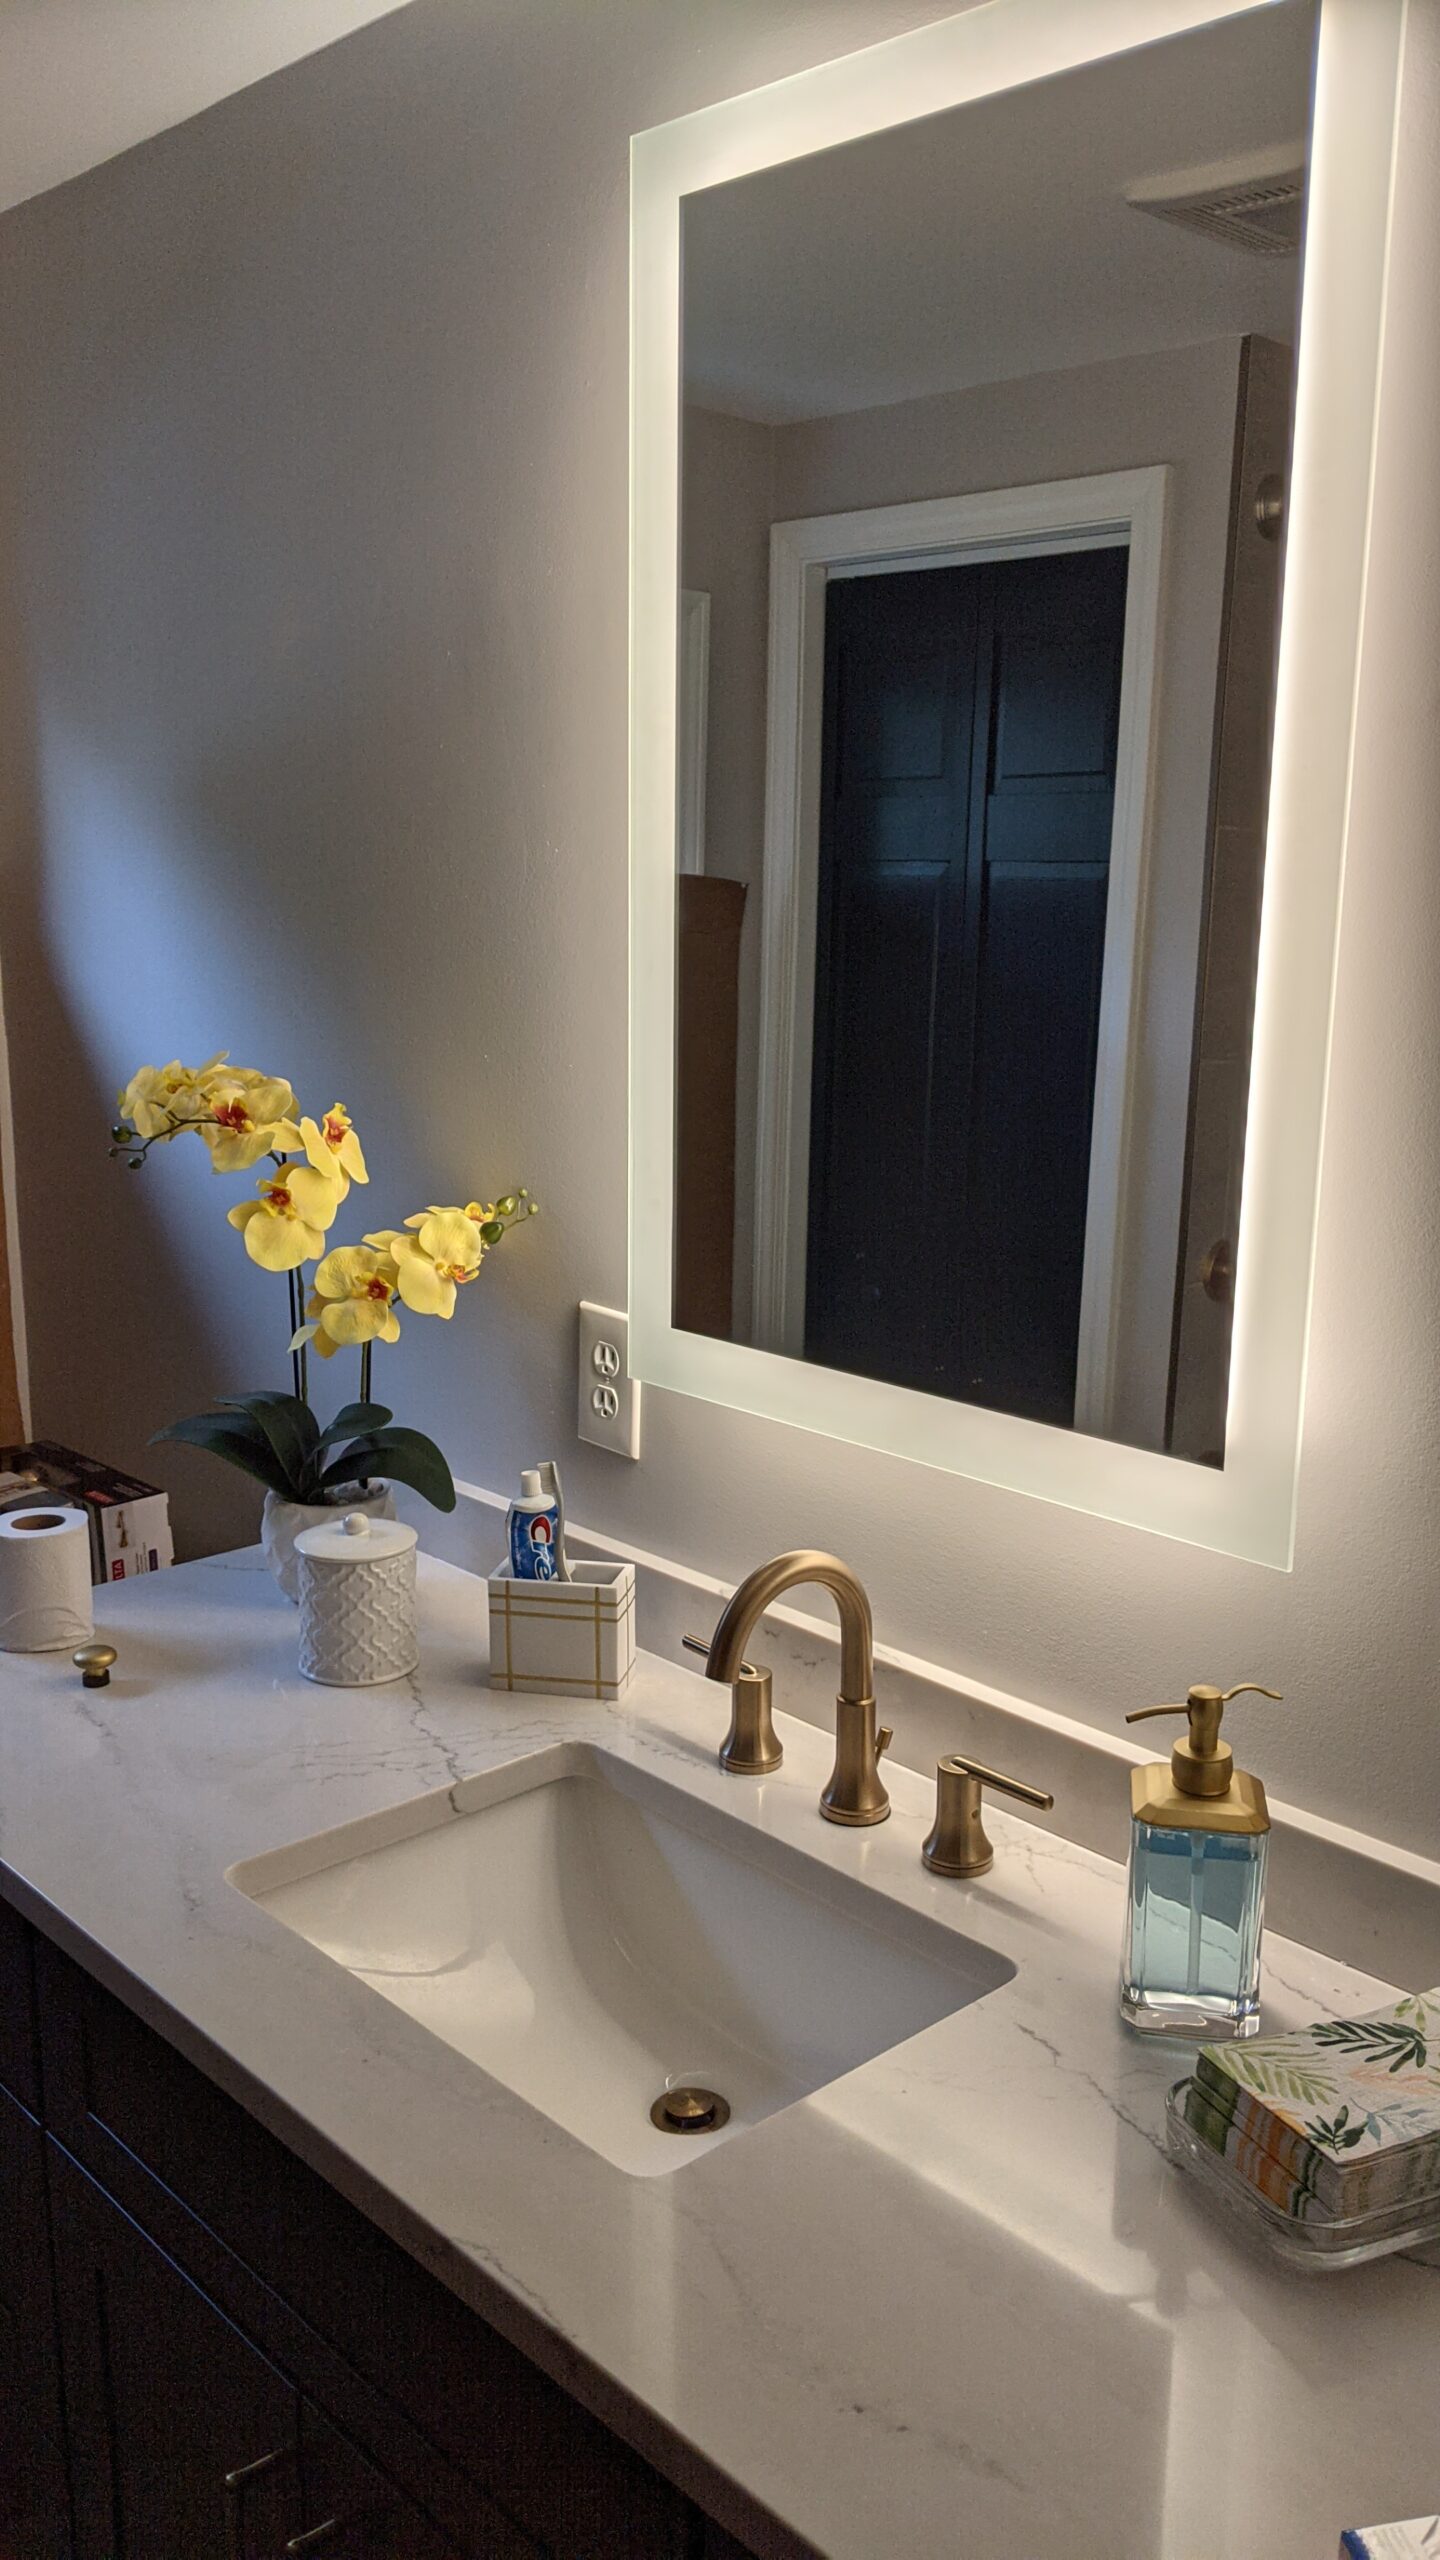 After pictures of the modern vanity.